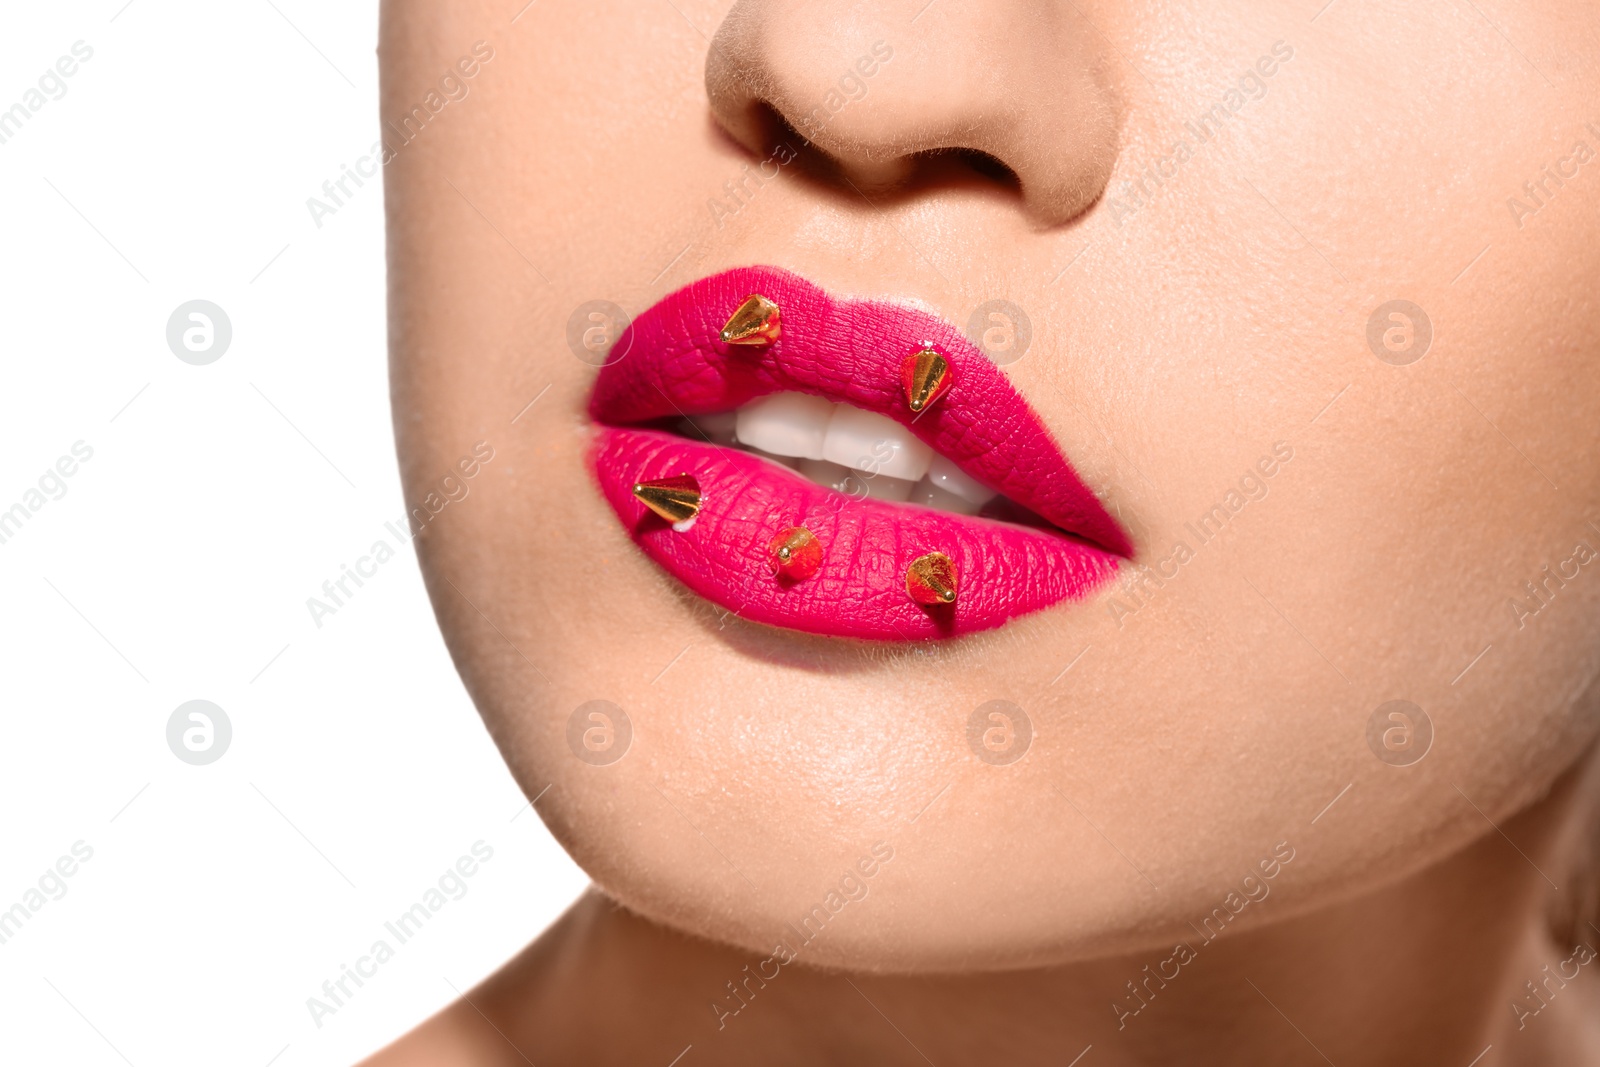 Photo of Beautiful young model with decorative spikes on lips against white background